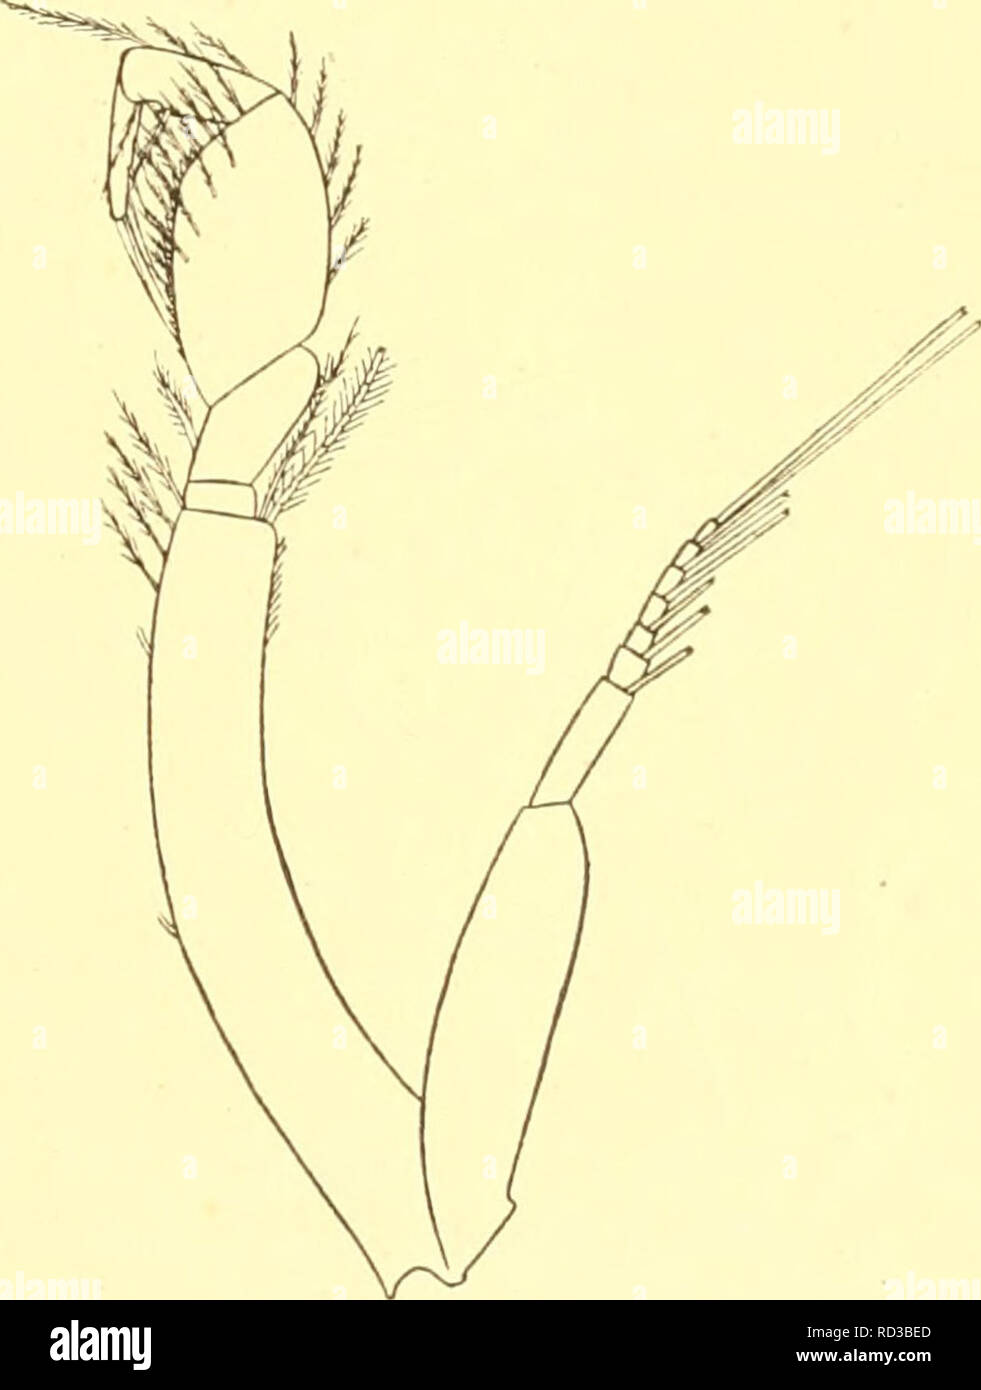 . Cumacea (Sympoda). Cumacea. Cumacea: 20. Lampropidae, 3. Platytyphlops, 4. Bathylamprops, 21. Dicidae ir)i) have breadth of carapace a little less than the length, with minute teeth along from eyelobe to beyond the middle, with no paired ridges to the rear; telson only a little longer than the 6*^ pleon segment; antenna 1 with principal tlagellum 6- or 7-jointed, accessory 4-jointed; antenna 2 Q as in P. peringueyi, but 'S^ joint without tooth, 4*^^ more than twice as long as 3*^^; peraeopods as in P. j^enngveyi; endopod of uropods about as long as the peduncle. L. Q with developing oostegit Stock Photo